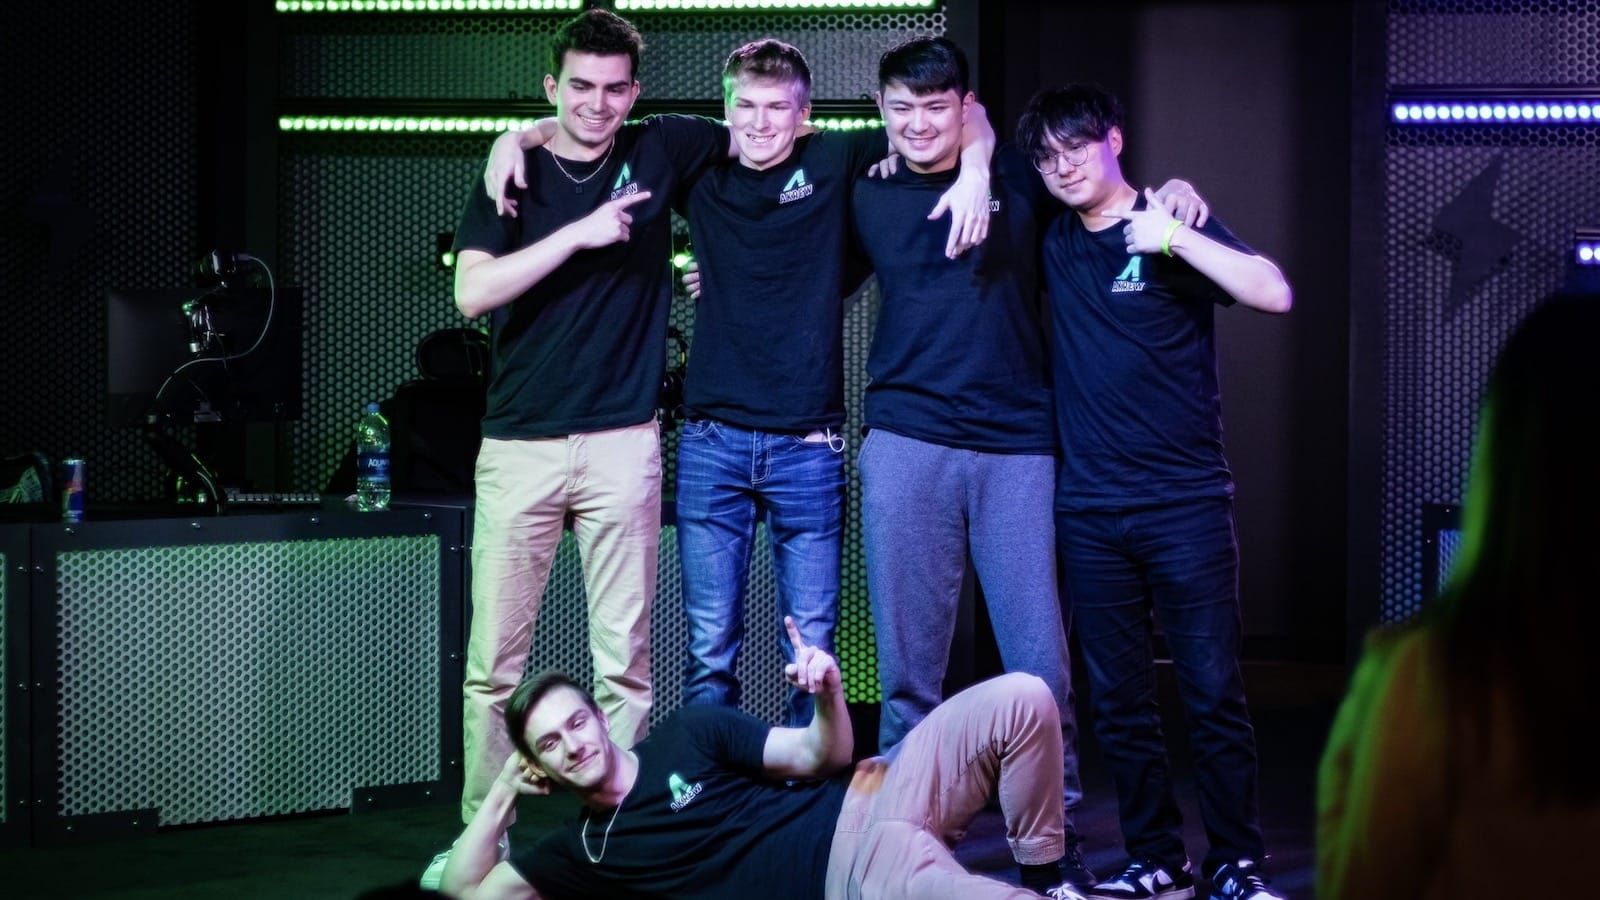 Akrew Valorant team pose on stage after winning a tournament